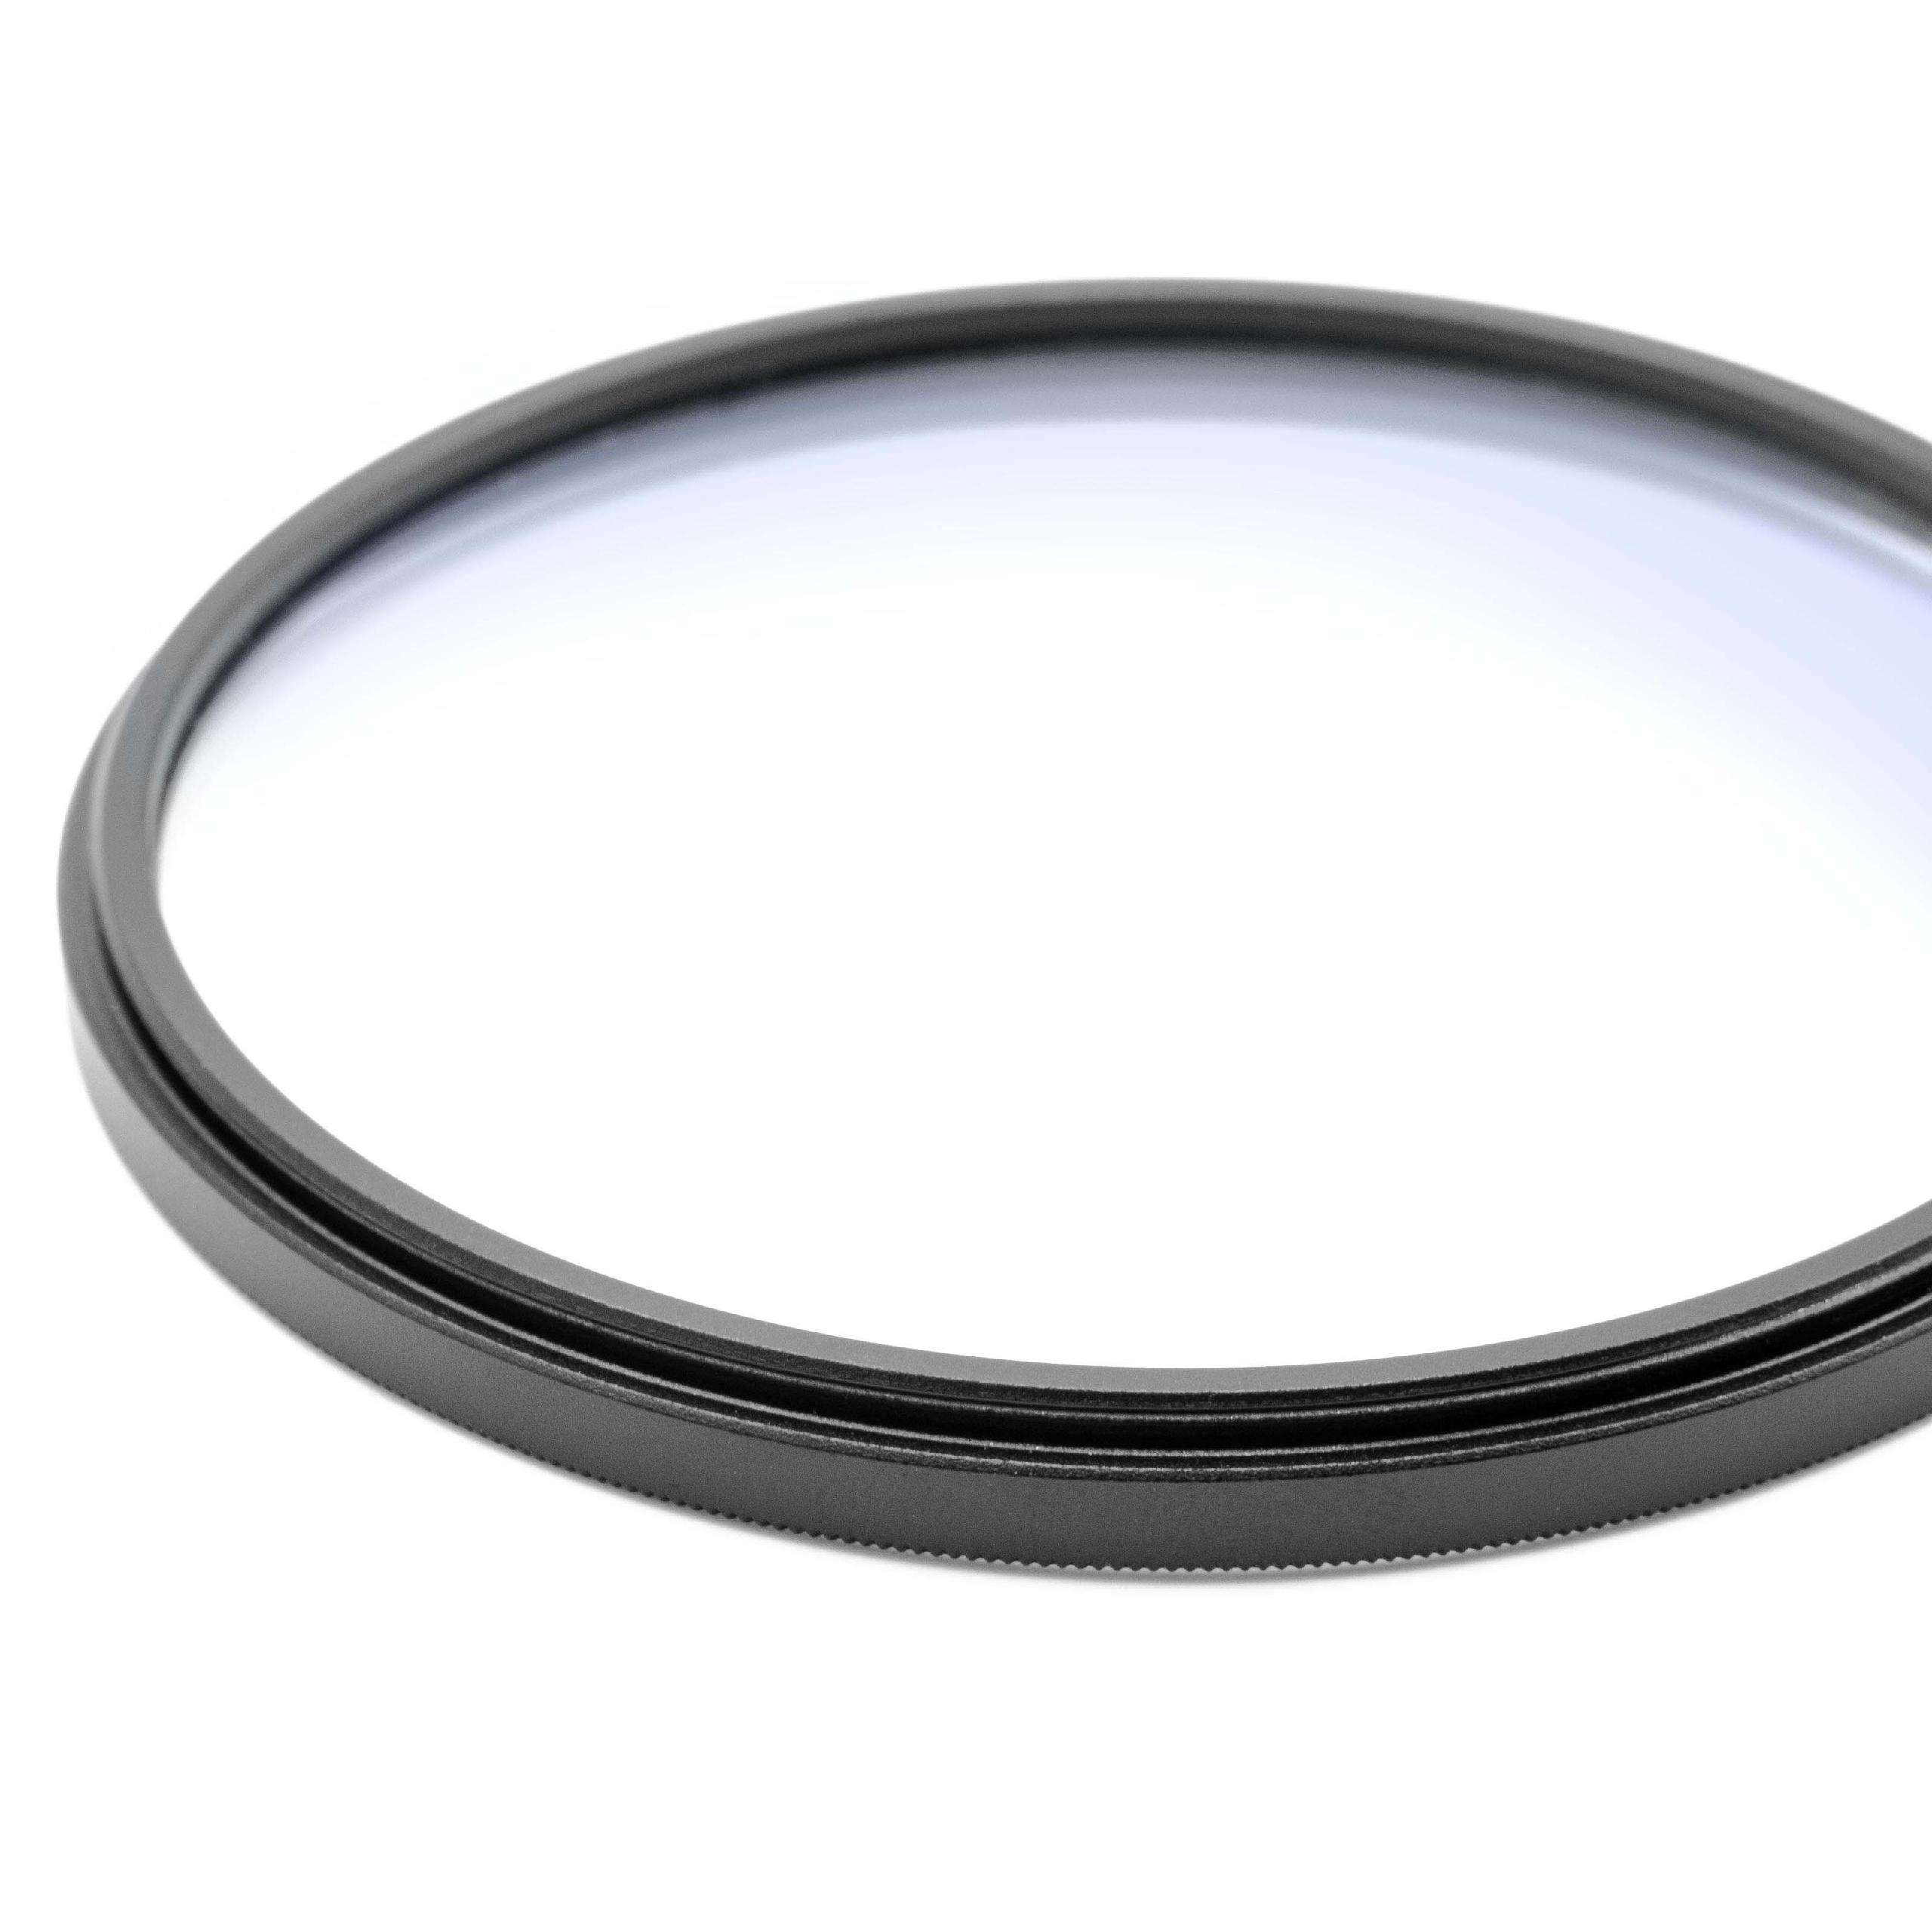 Soft Focus Filter suitable for Cameras & Lenses with 77 mm Filter Thread - Soft Filter